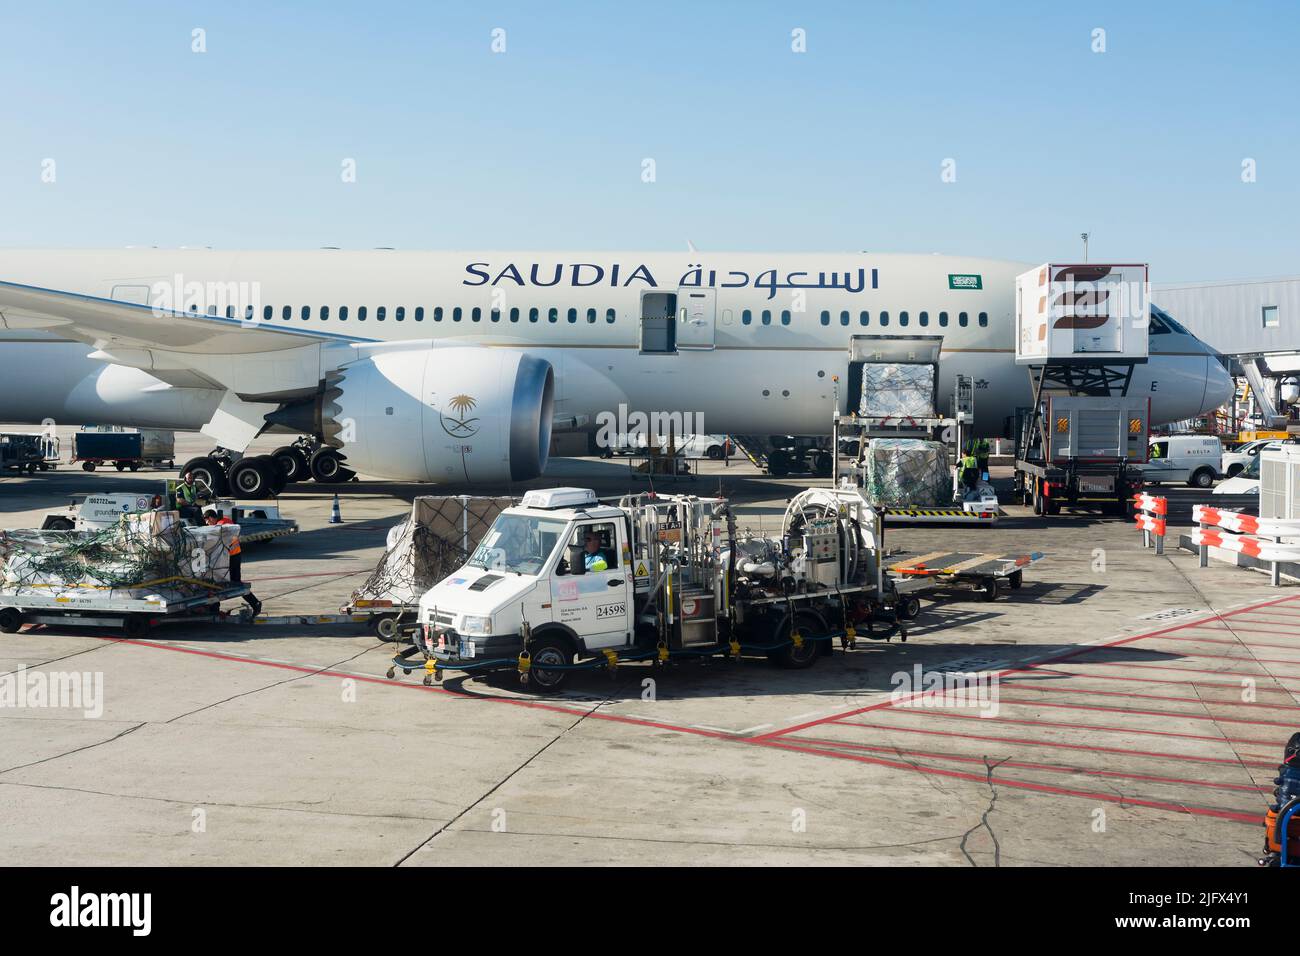 Saudia aircraft, Boeing Dreamliner 787-900, surrounded by ground equipment. Saudia, formerly known as Saudi Arabian Airlines, is the flag carrier of S Stock Photo